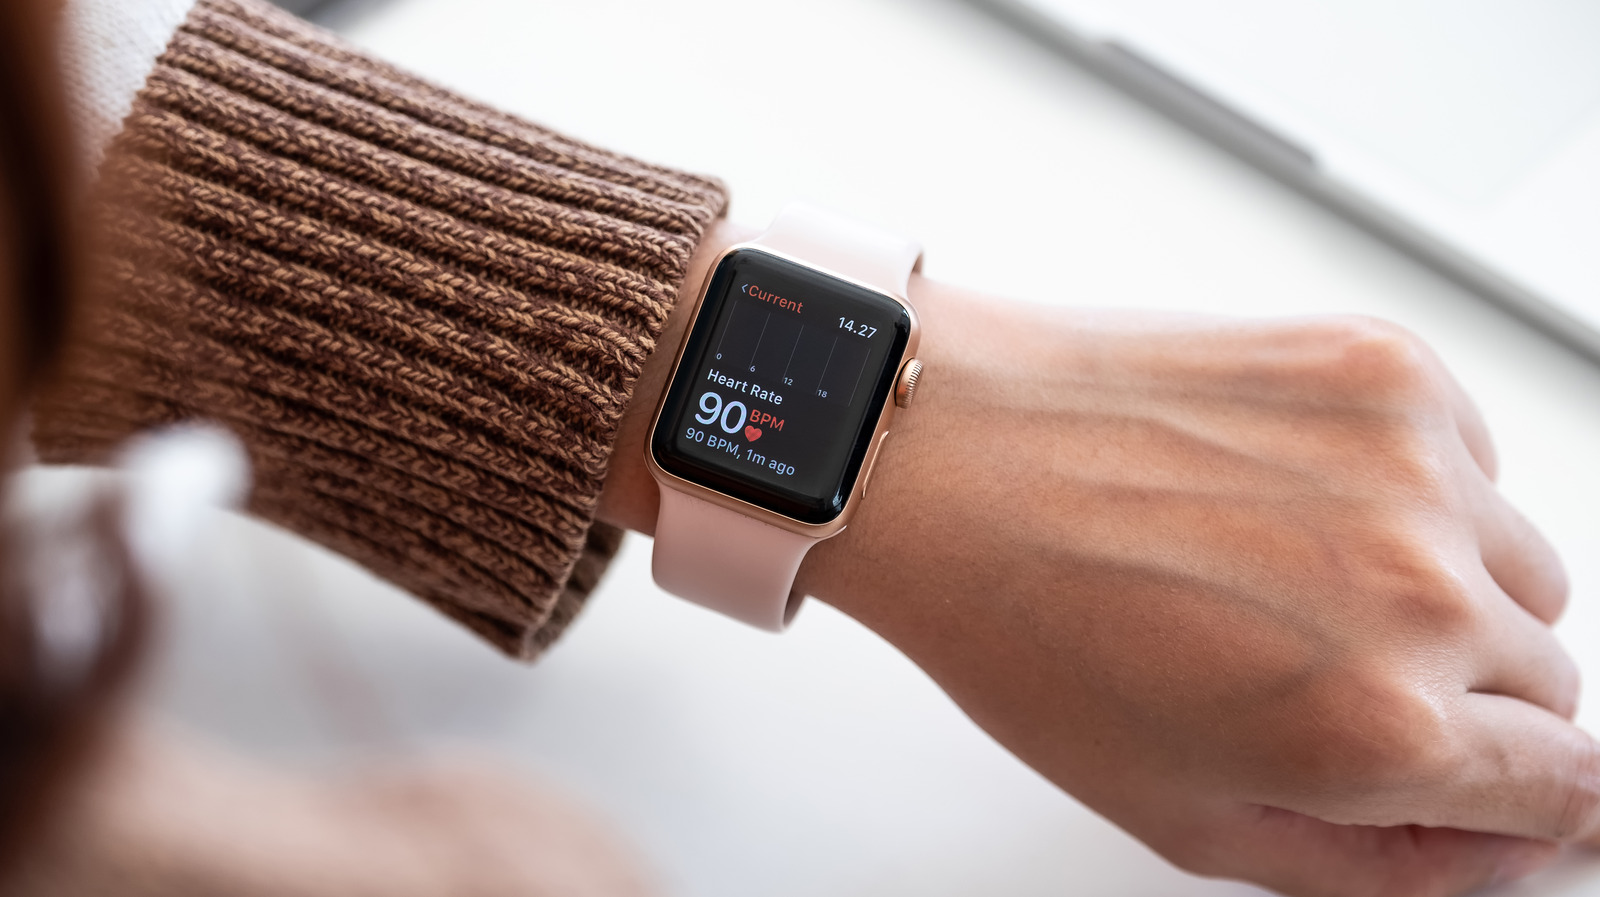 samsung-galaxy-watch-s-rising-popularity-has-apple-running-for-cover